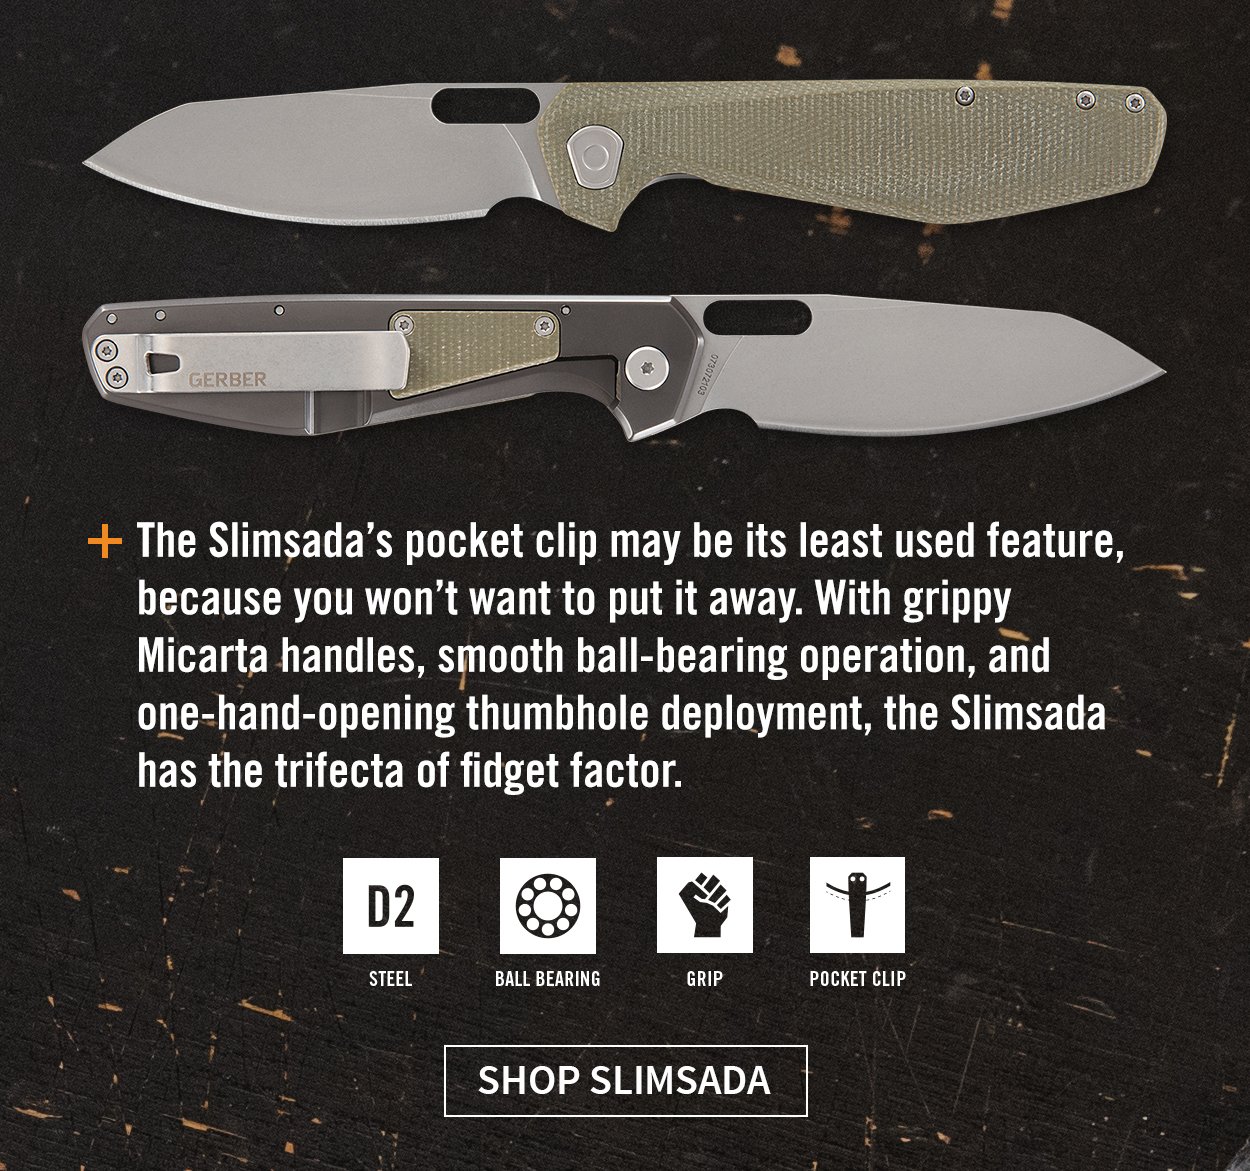 Gerber Gear - Through tomorrow night only, save 20% on